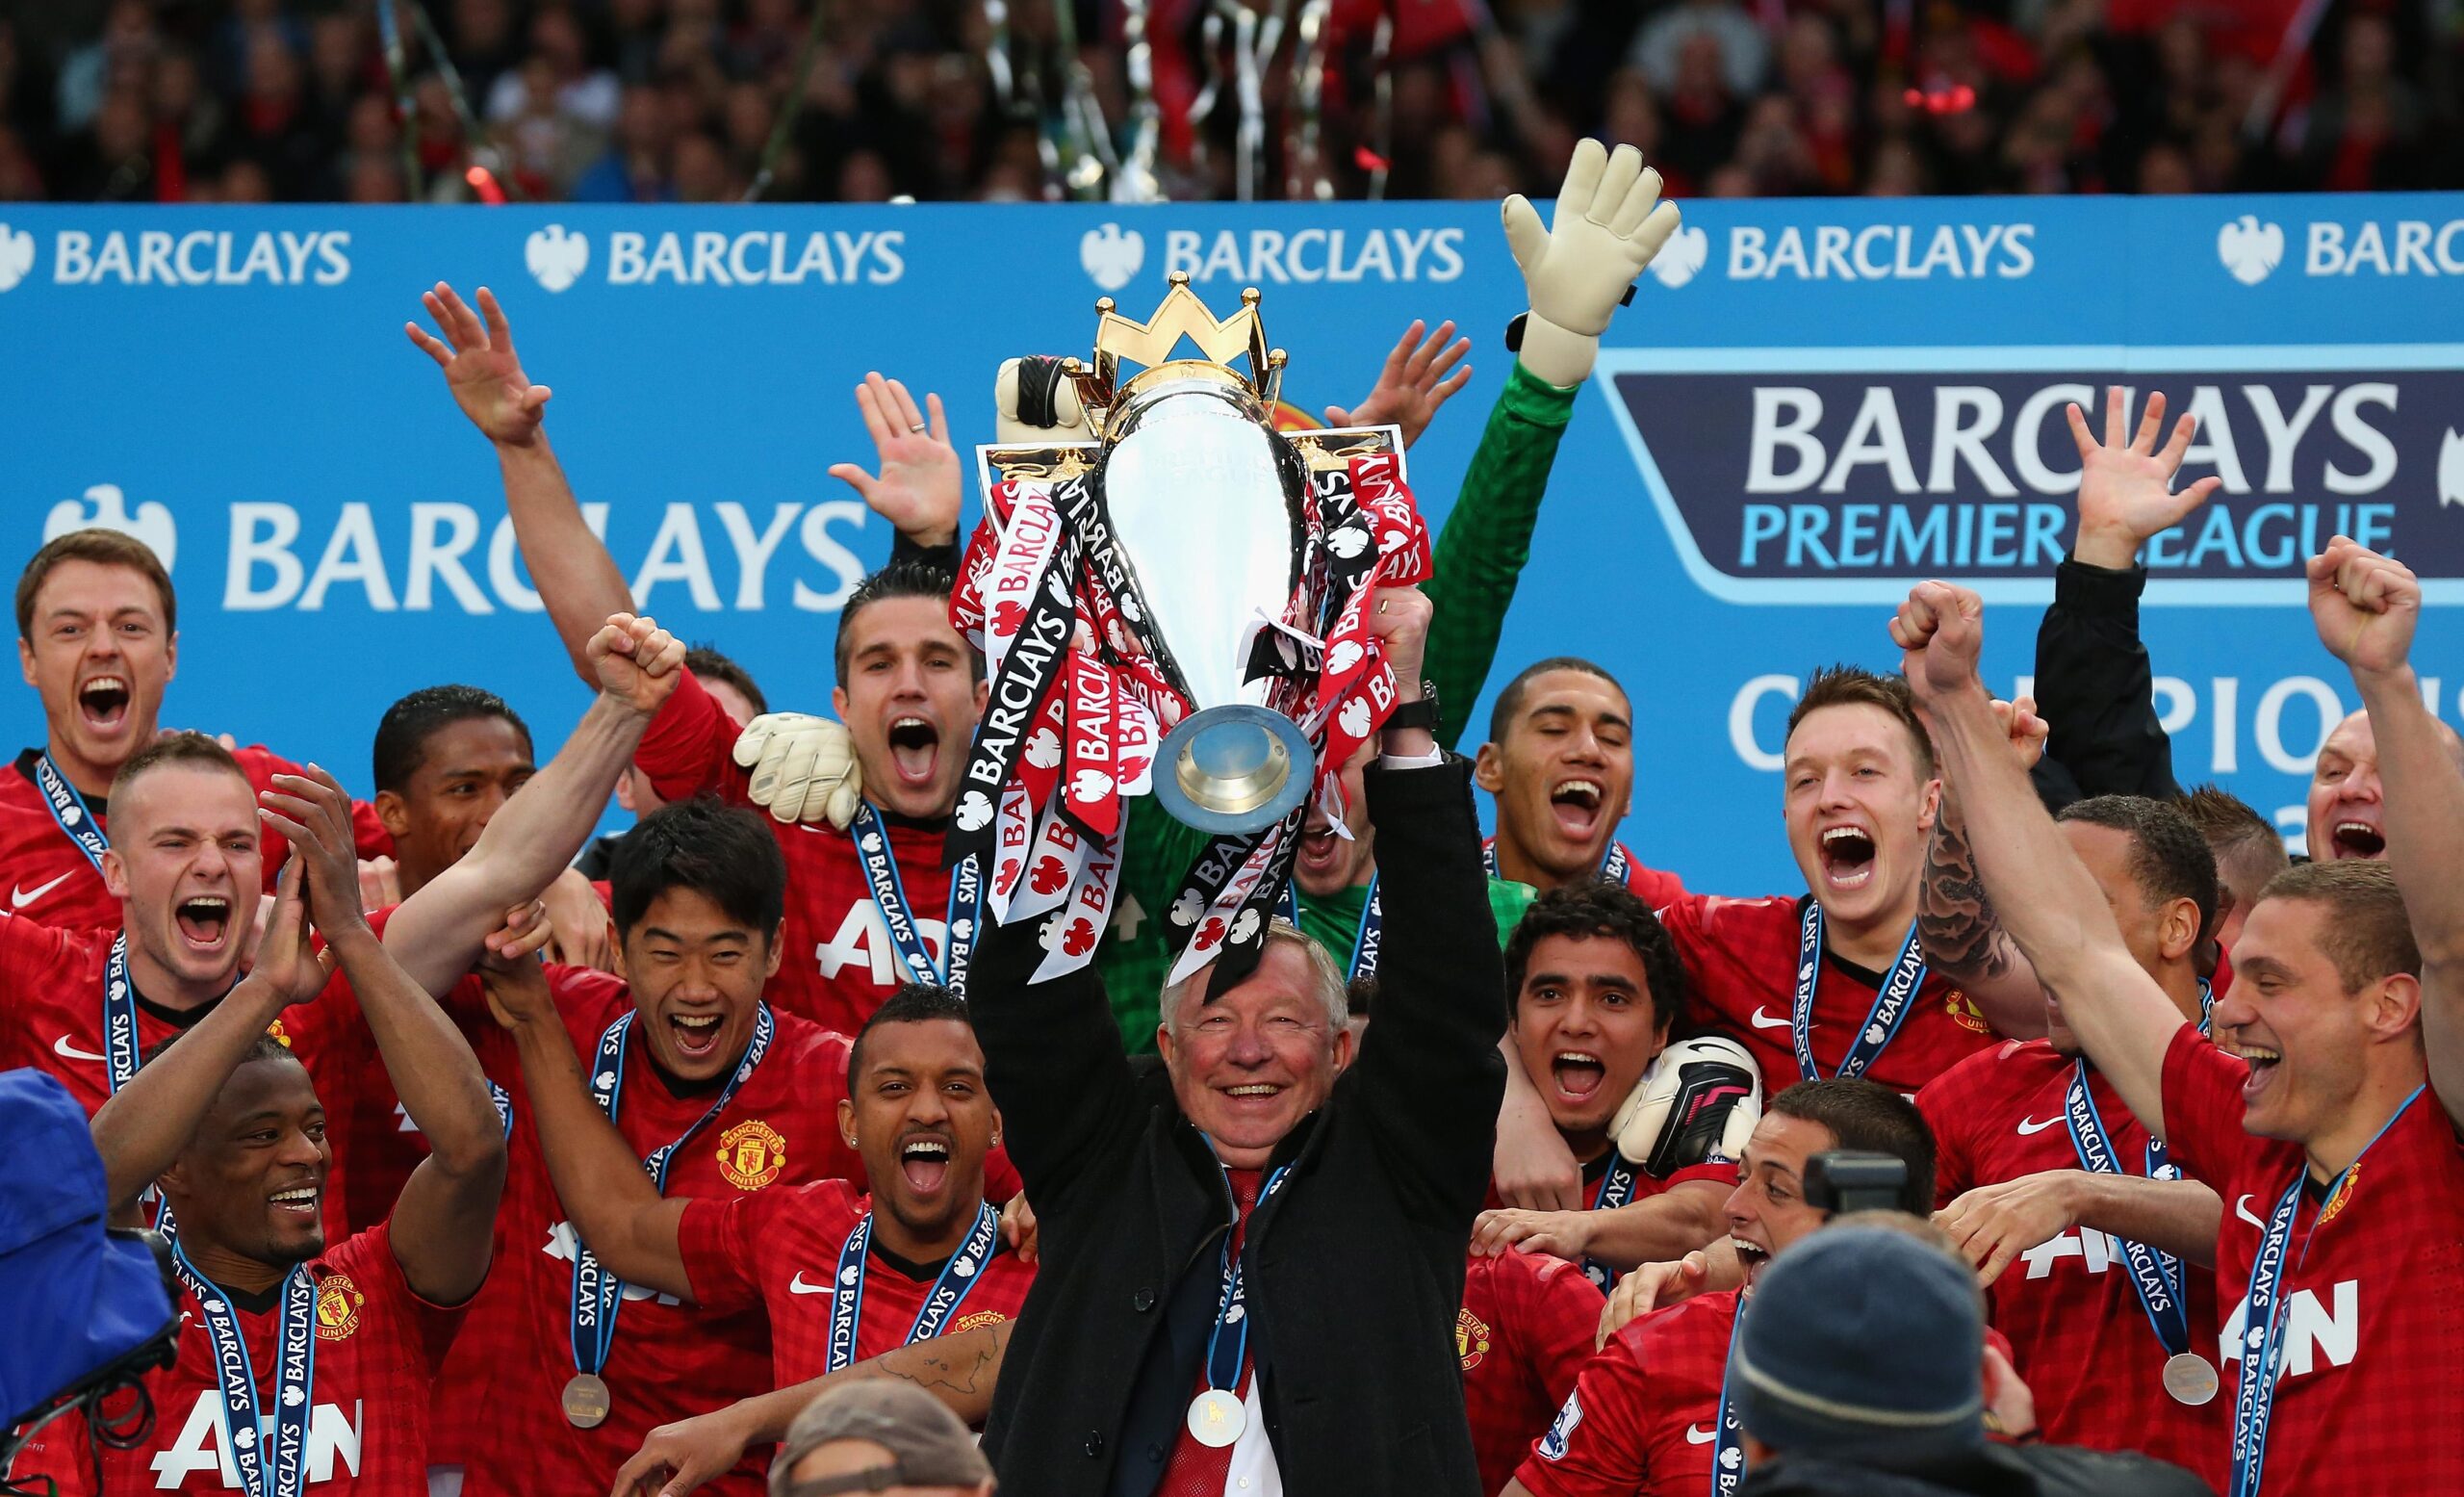 Manchester United is most successful soccer team in England 